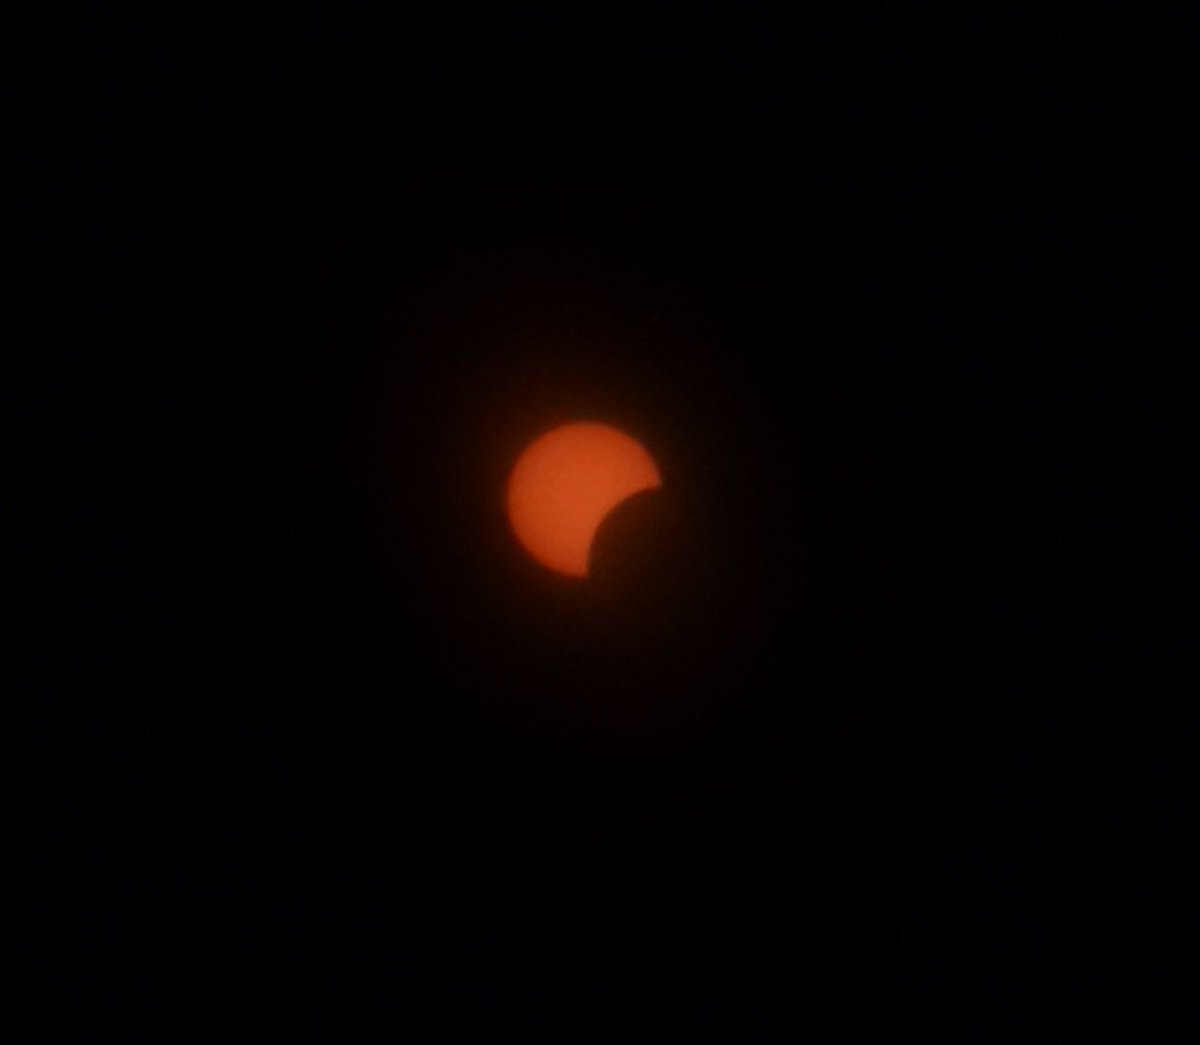 The best photo that I could get from the #SolarEclipse today with my phone. I'd say it's pretty decent